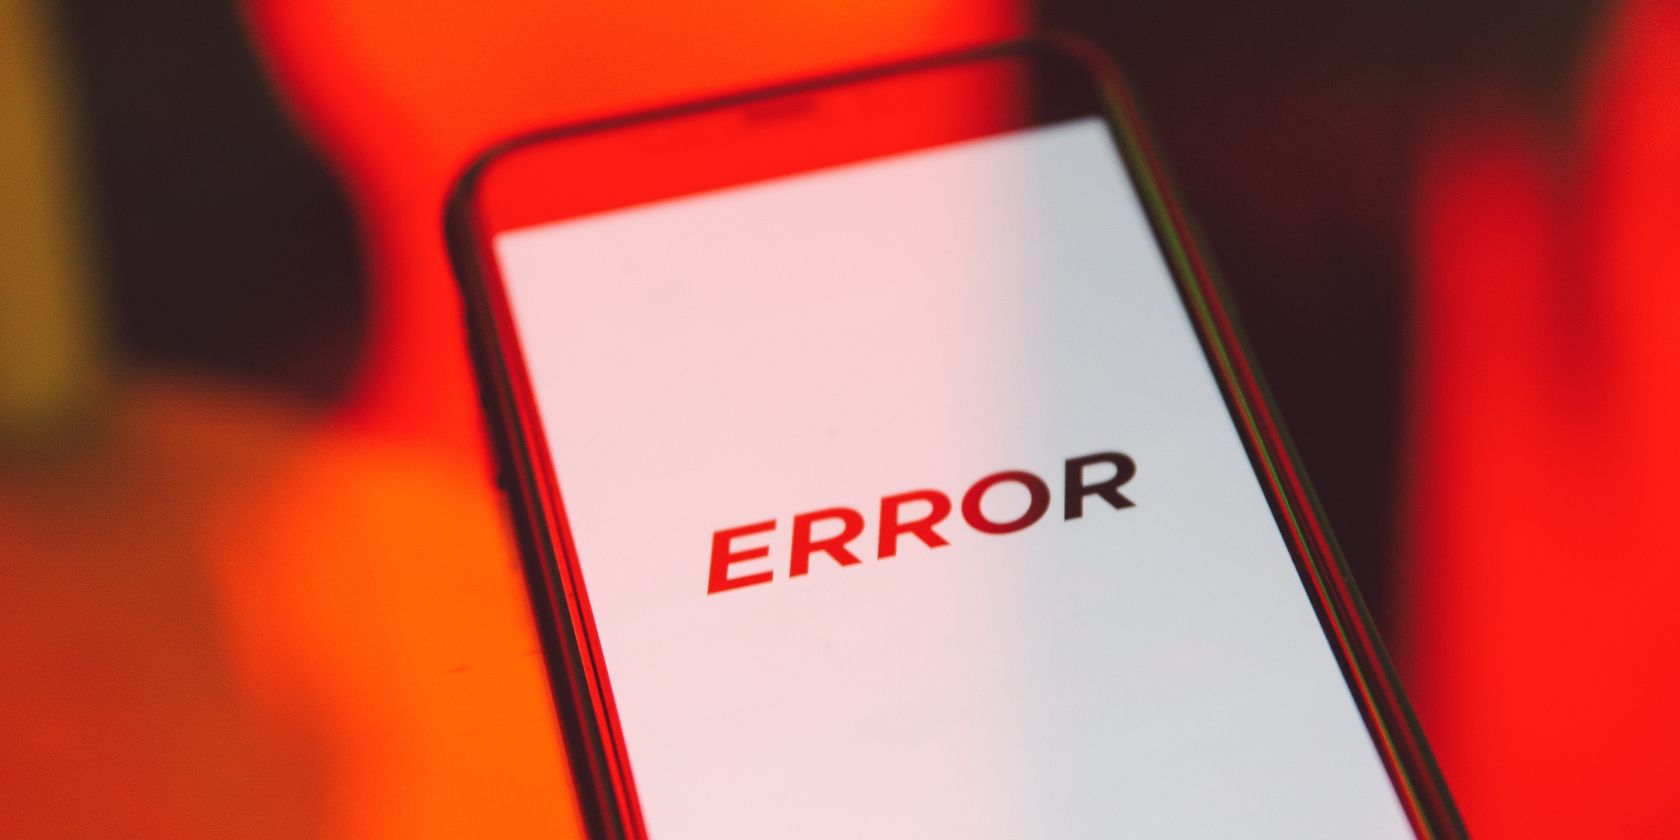 Error message on the phone